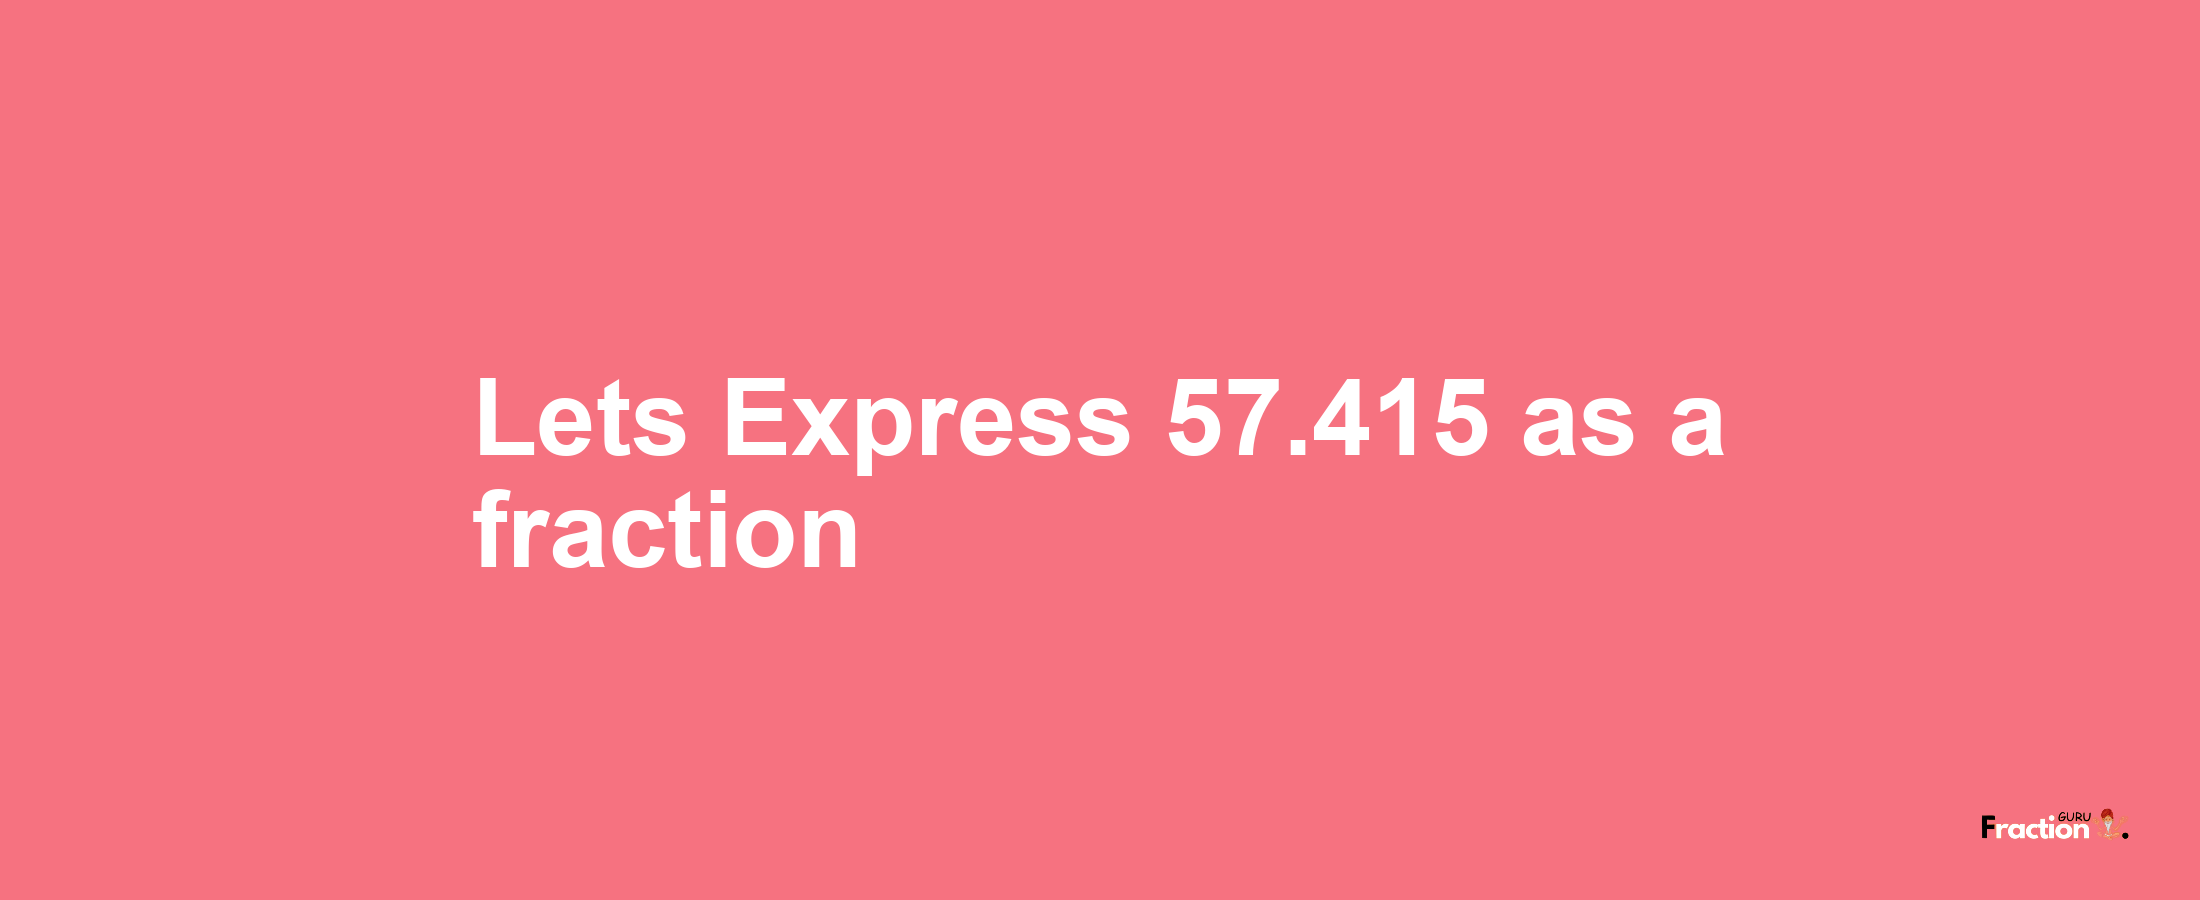 Lets Express 57.415 as afraction